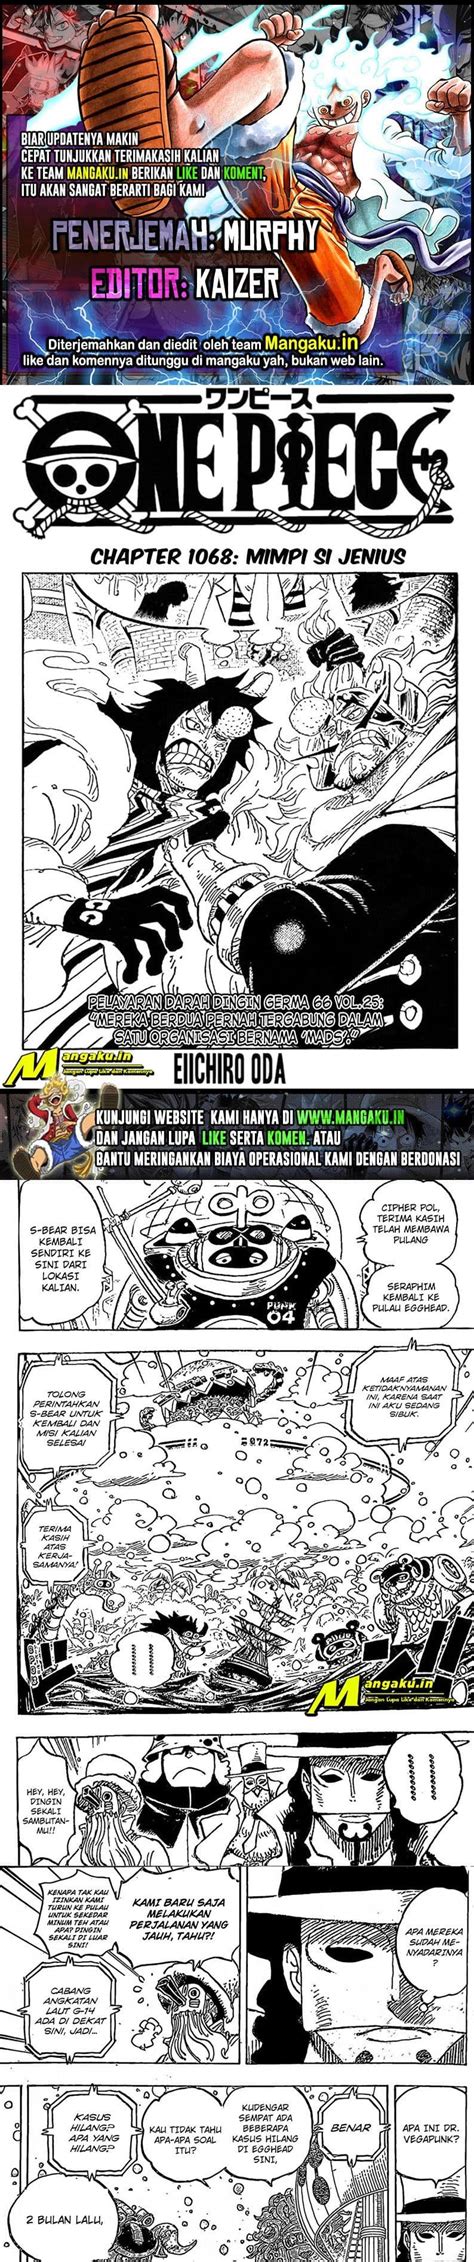 One Piece Chapter 1068 - Page 1